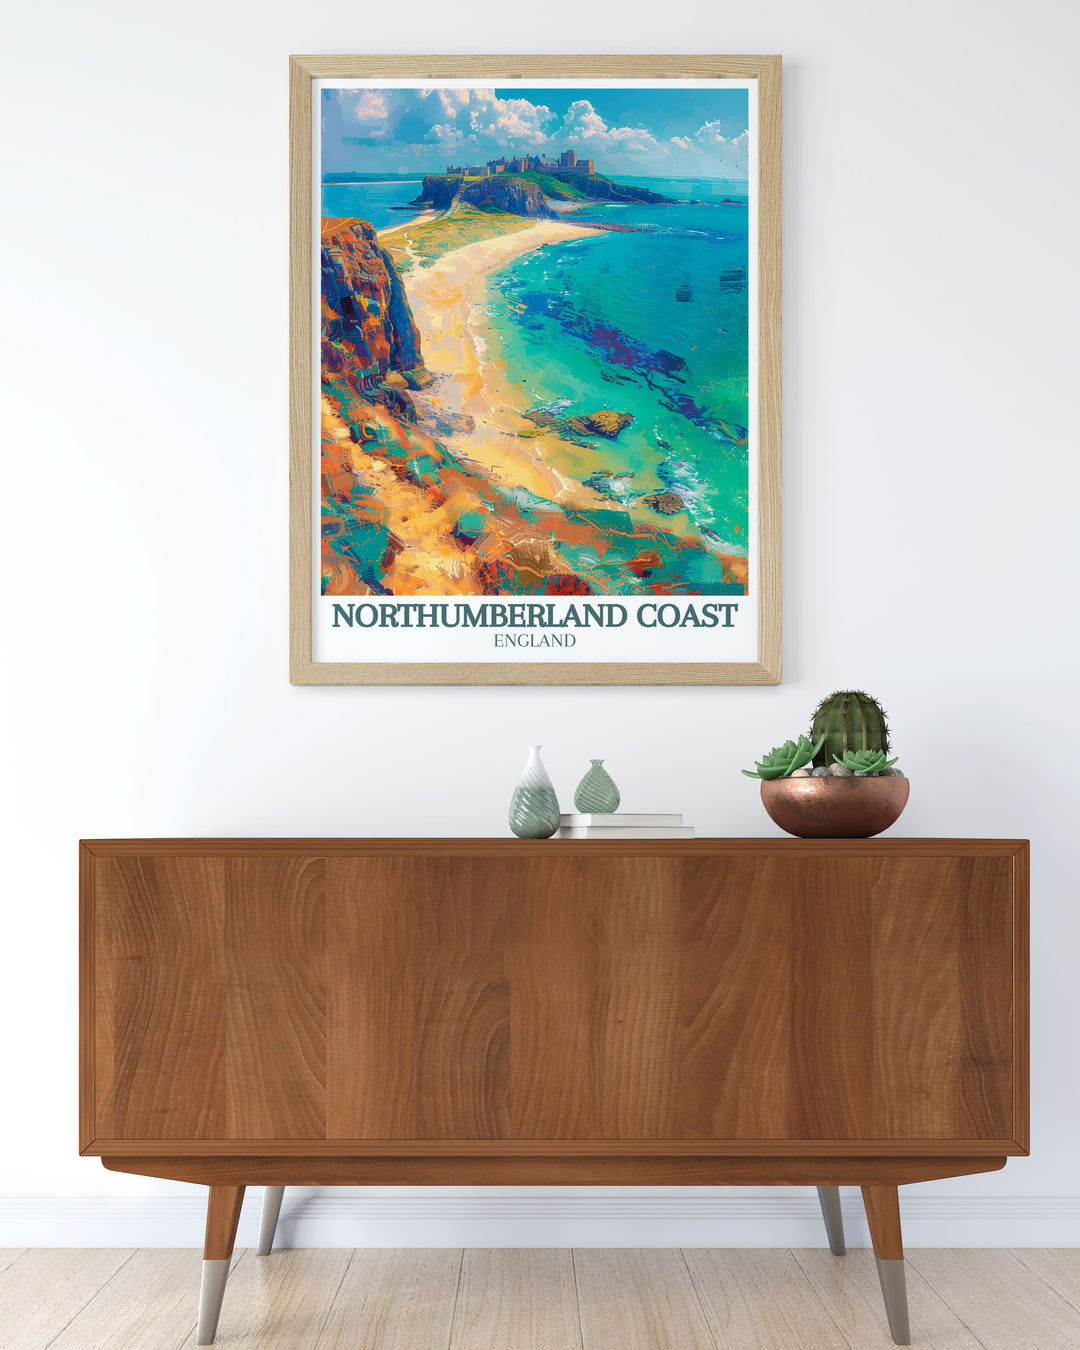 Seahouses wall art depicting the quaint village with the imposing Bamburgh Castle and Dunstanburgh Castle in the background capturing the essence of Northumberlands coastal beauty and heritage a must have for art lovers.